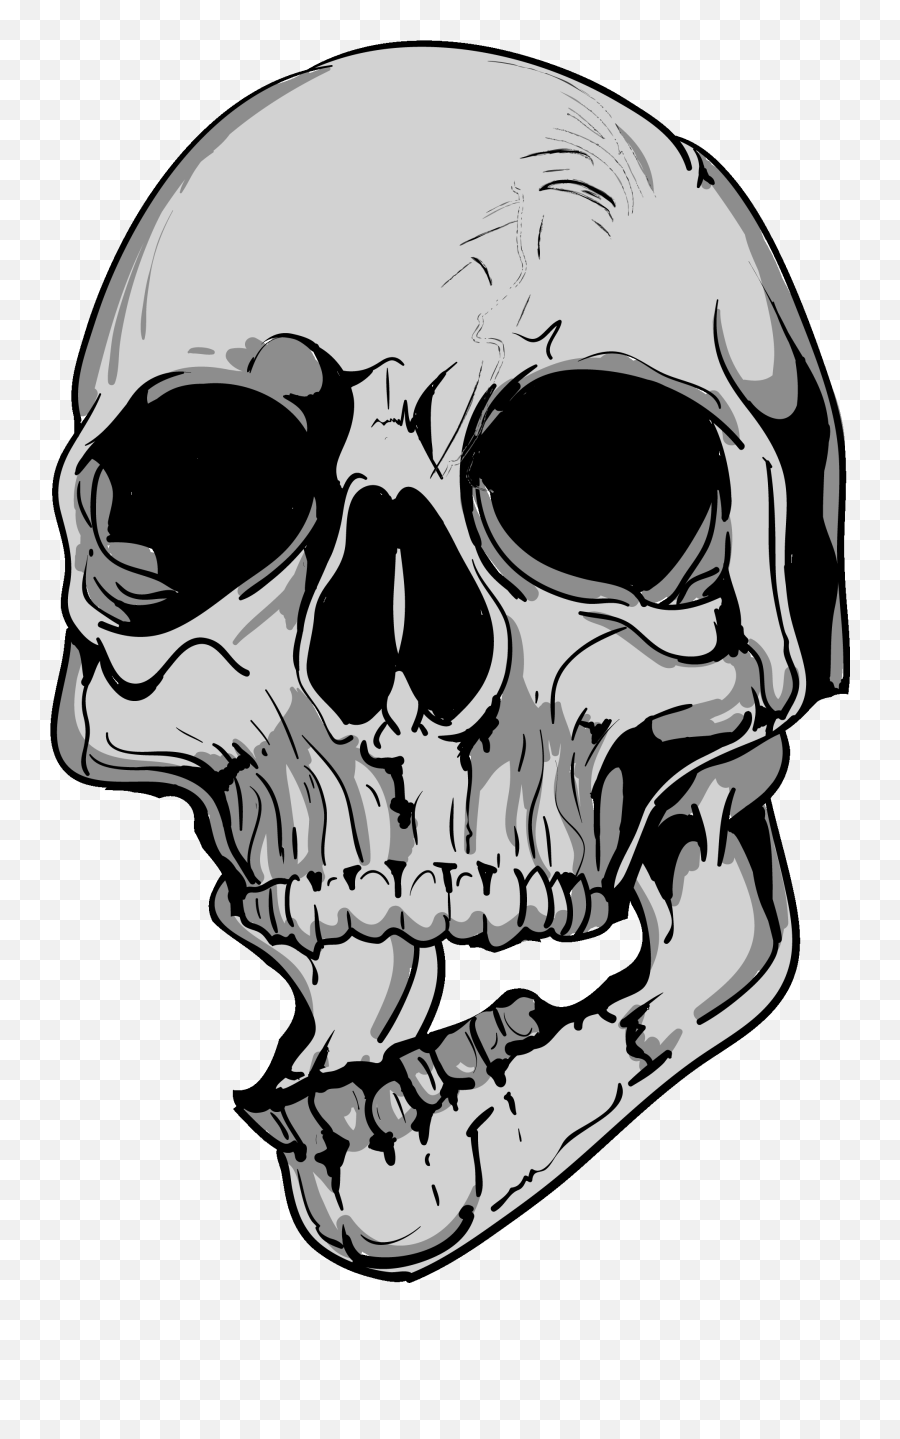 8bit - Skull Drawing Mouth Open Transparent Png Original Skull Open Mouth Pdf,Skull Transparent Png